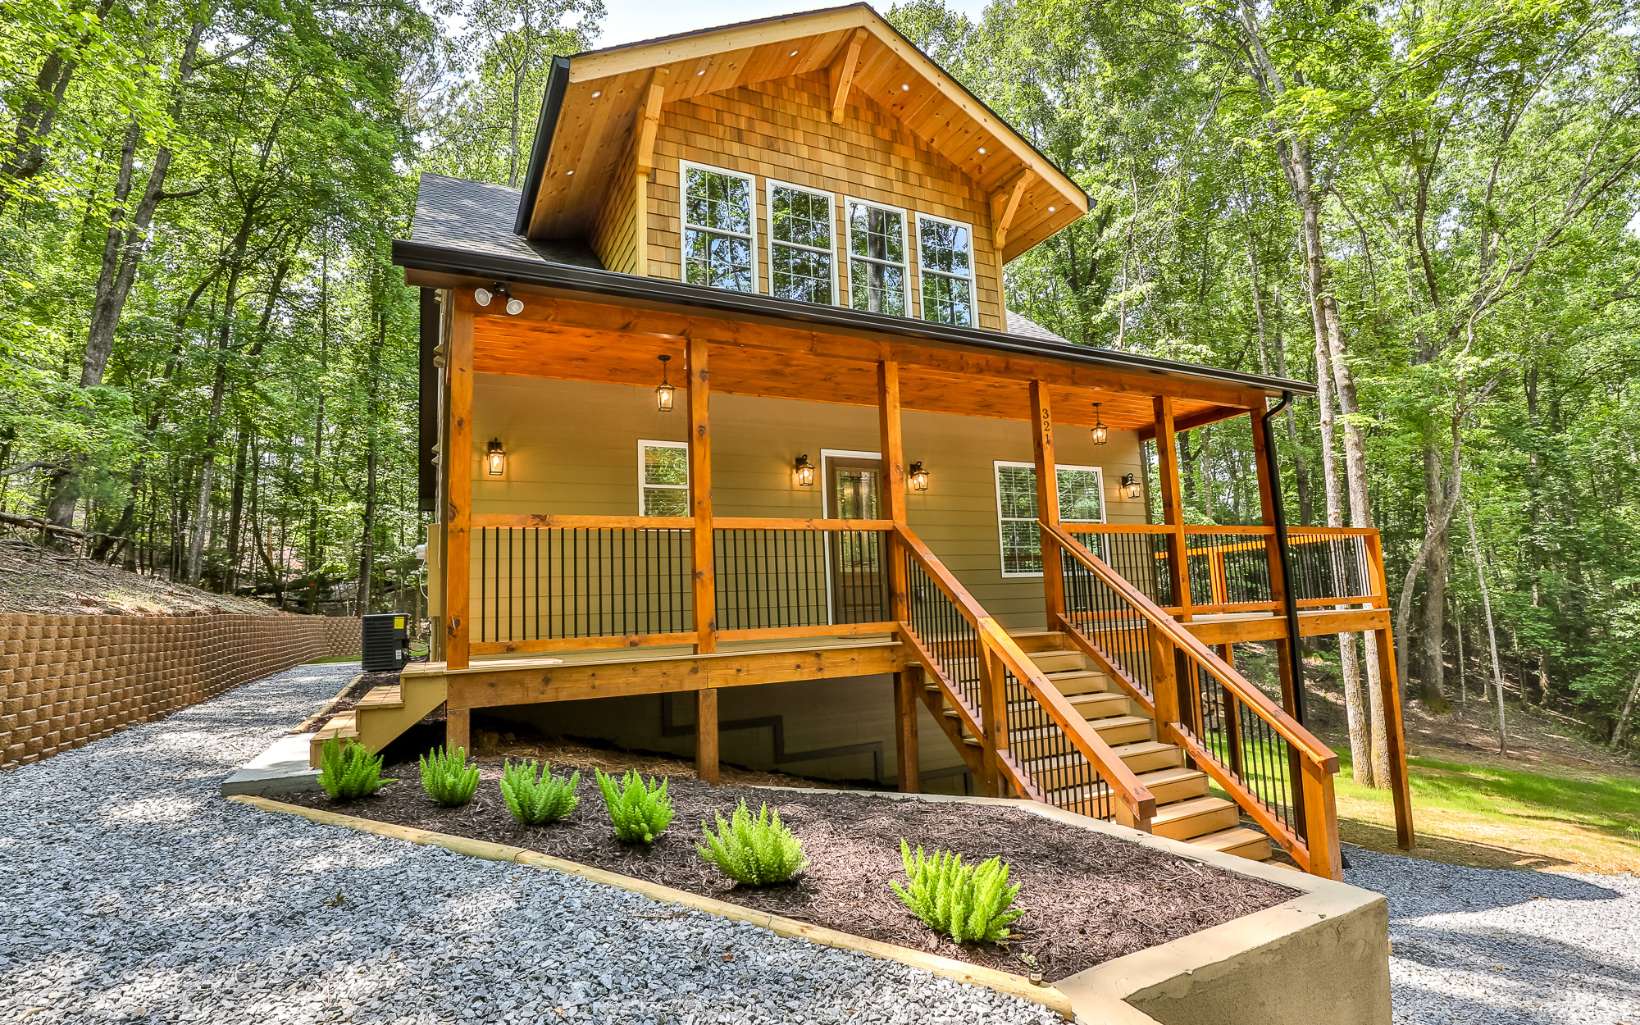 Experience the pinnacle of mountain living in Ellijay, Georgia! This stunning Modern Rustic style home sits on a private 3/4 acre wooded lot, offering serenity and privacy. With 3 bedrooms and 2 1/2 baths, this spacious retreat boasts a main-level master, open family room, and an inviting eat-in kitchen. Enjoy large porches, an outdoor fireplace, and room for a dog run, firepit, and garden. The walk-in crawlspace provides expansion potential. Upstairs, find a loft, two bedrooms with a shared bath, and a soaking tub. Embrace community amenities like rivers, swimming pools, parks, tennis, pickle ball and more. Short-term rentals permitted. Don't miss this mountain paradise! See for Yourself!